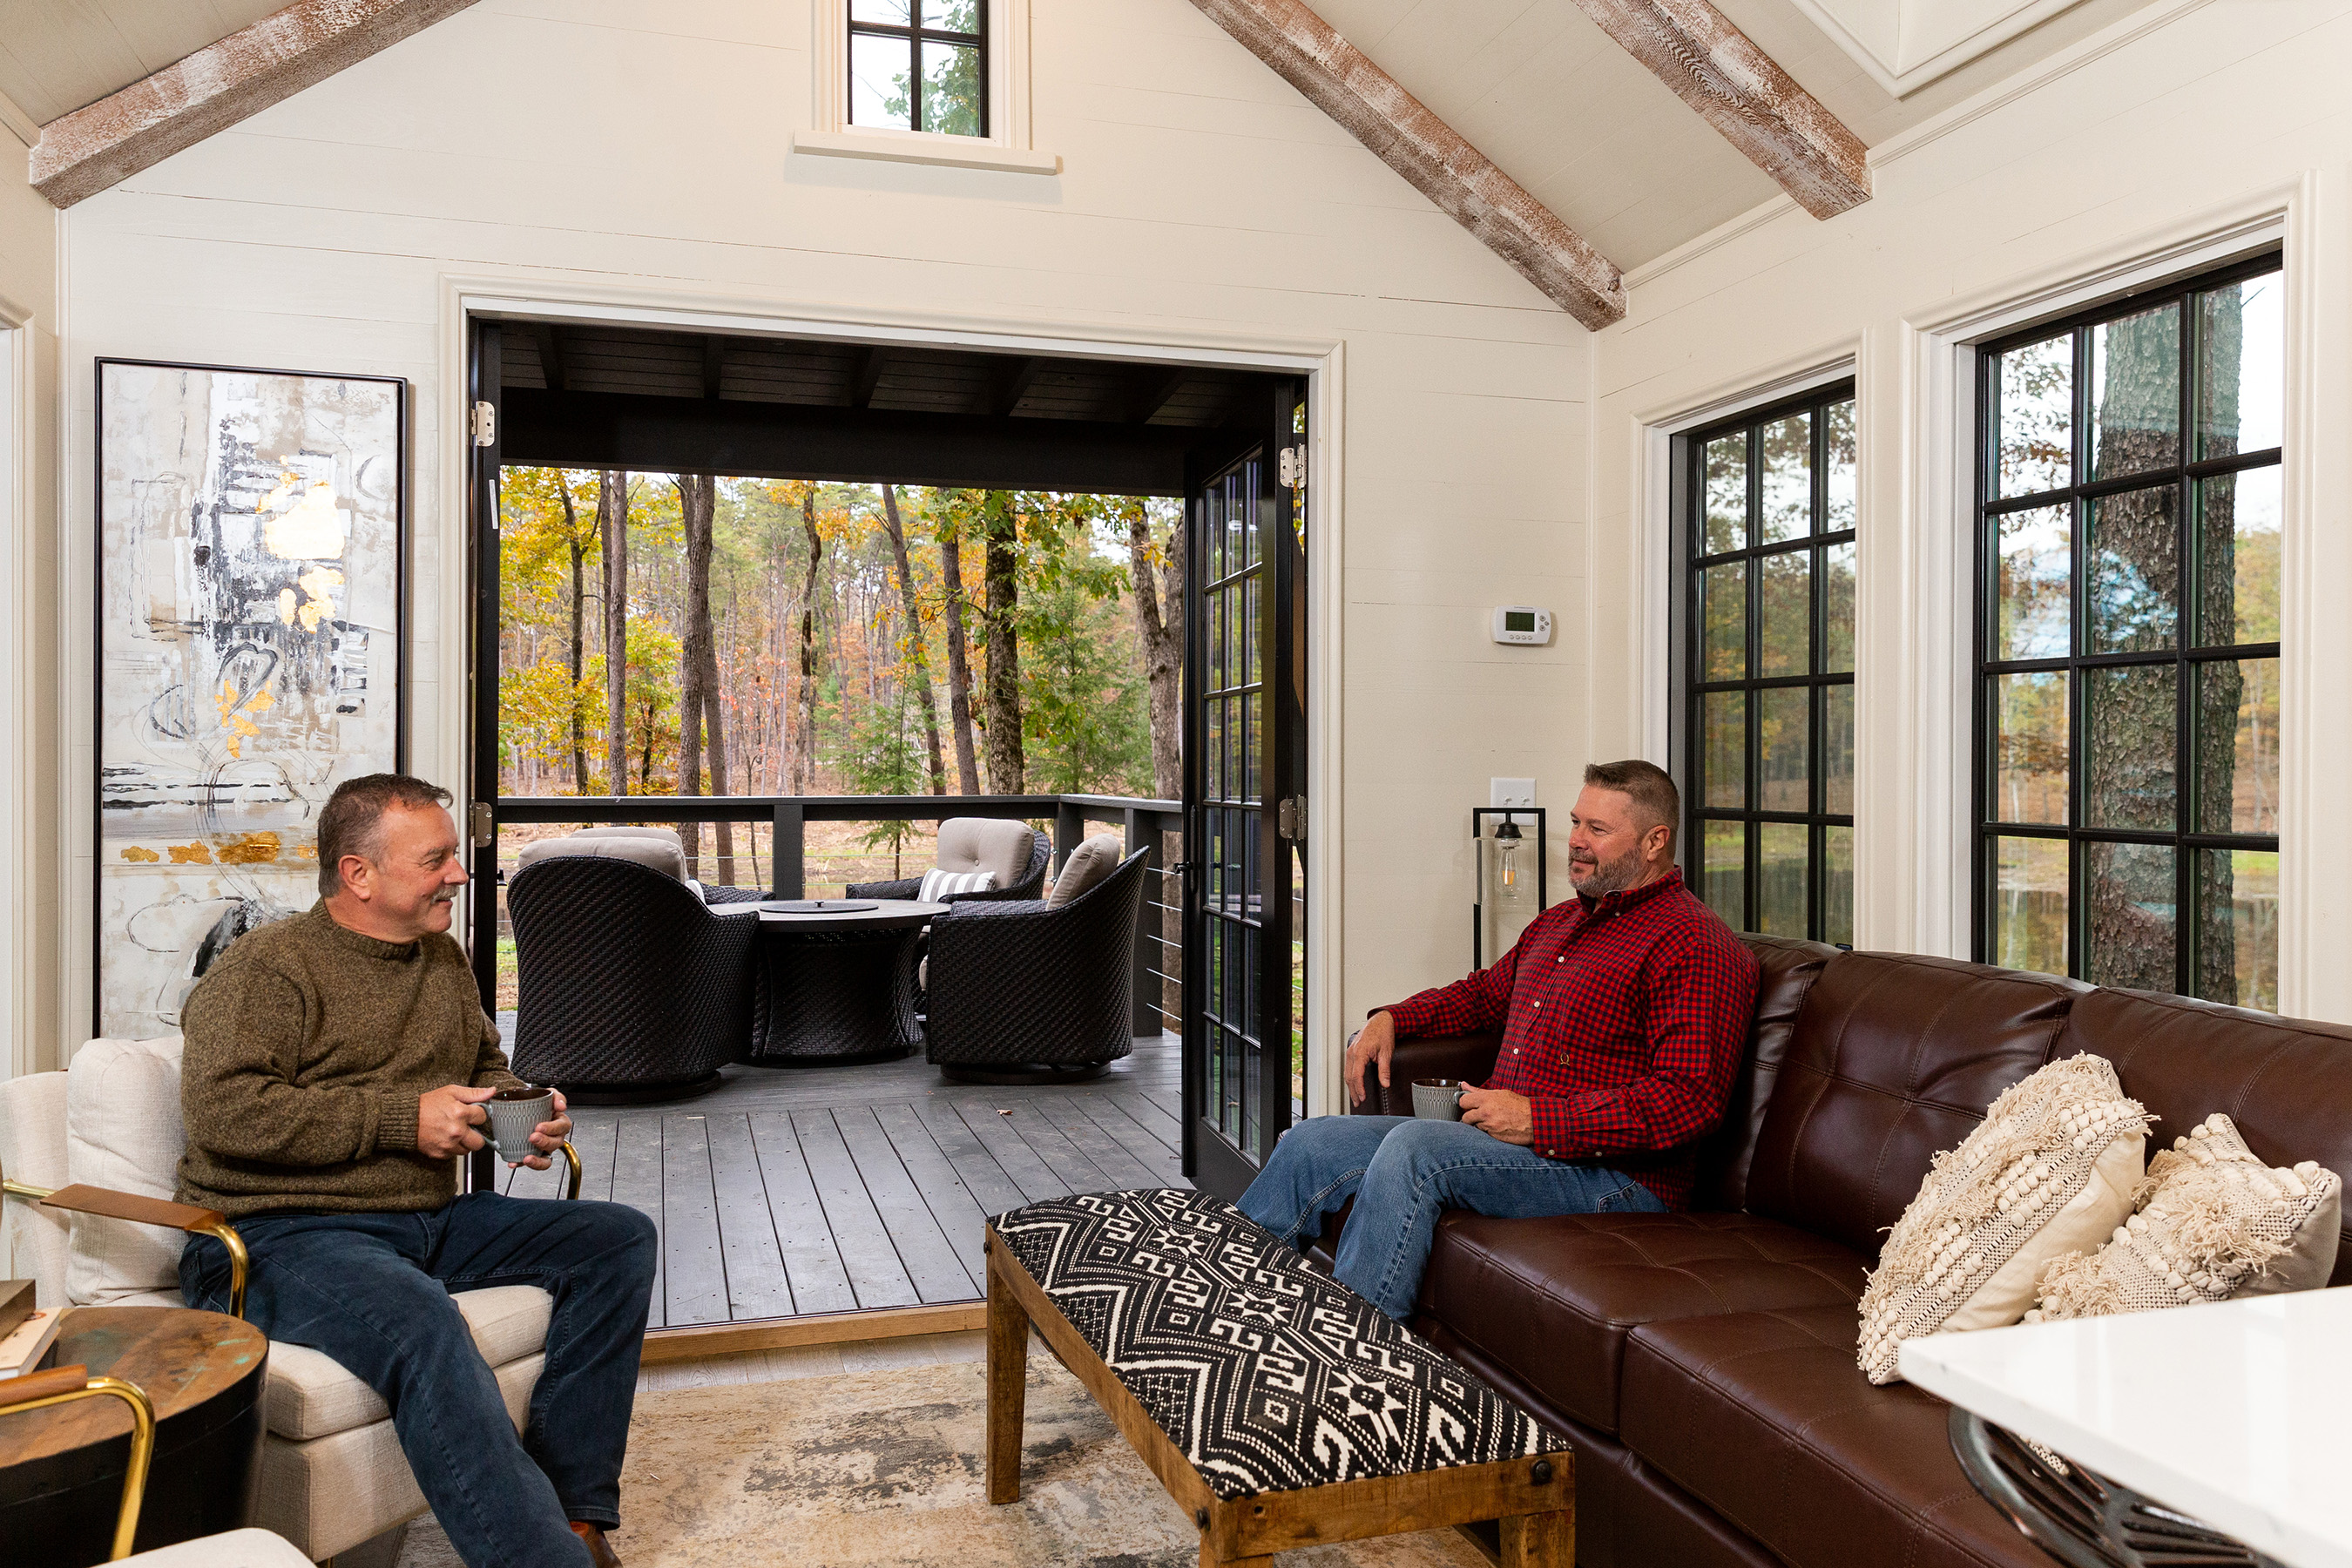 Tiny home community residents can enjoy the privacy of their cozy Designer Cottages while enjoying the outdoors and surrounding beauty just as much.